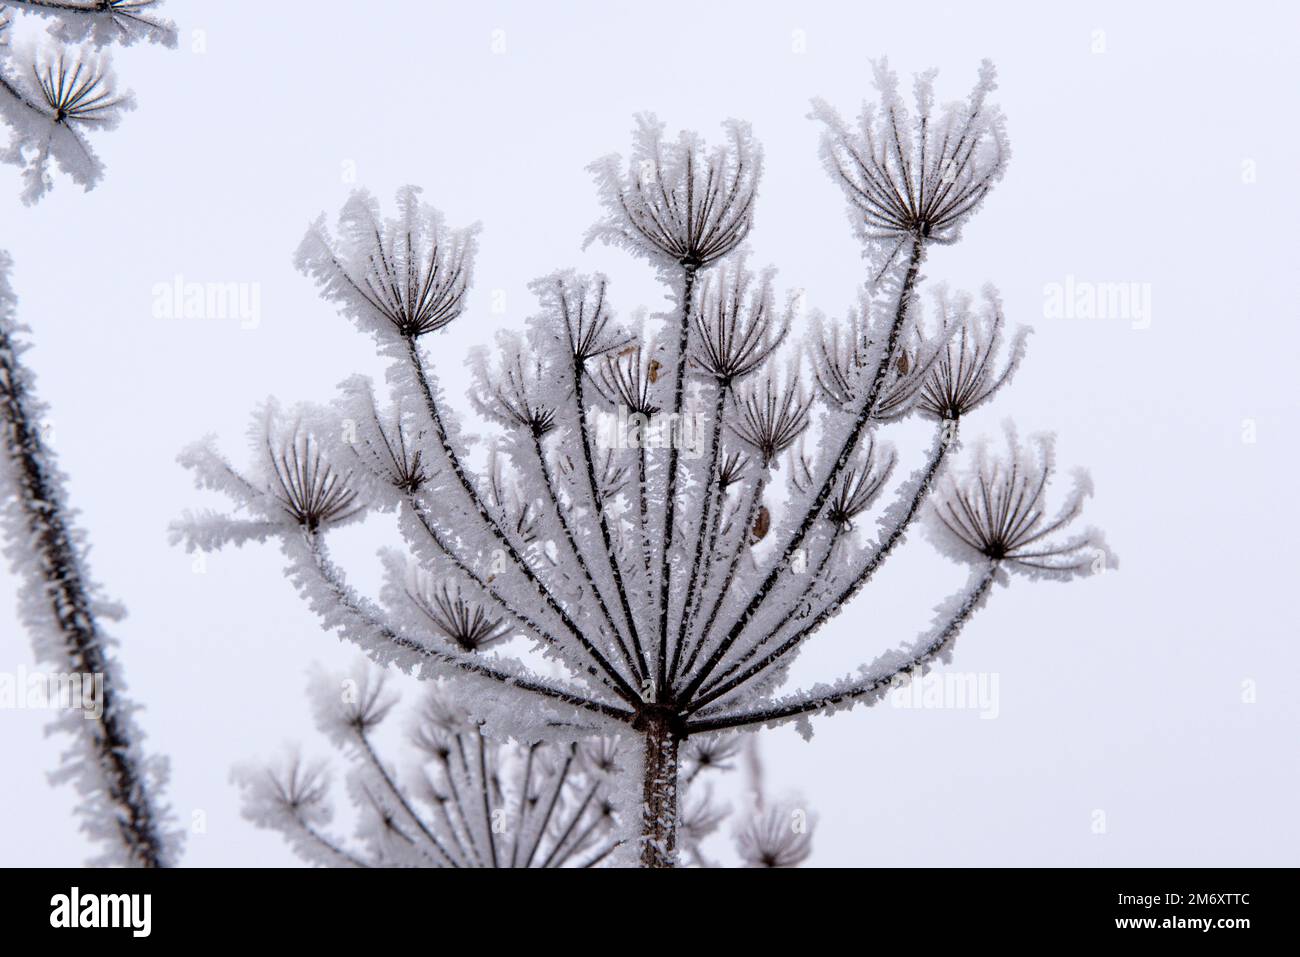 Hoar frost or rime ice from freezing fog on a dull grey December morning forming on the seeded umbels of common hogweed, Berkshire Stock Photo